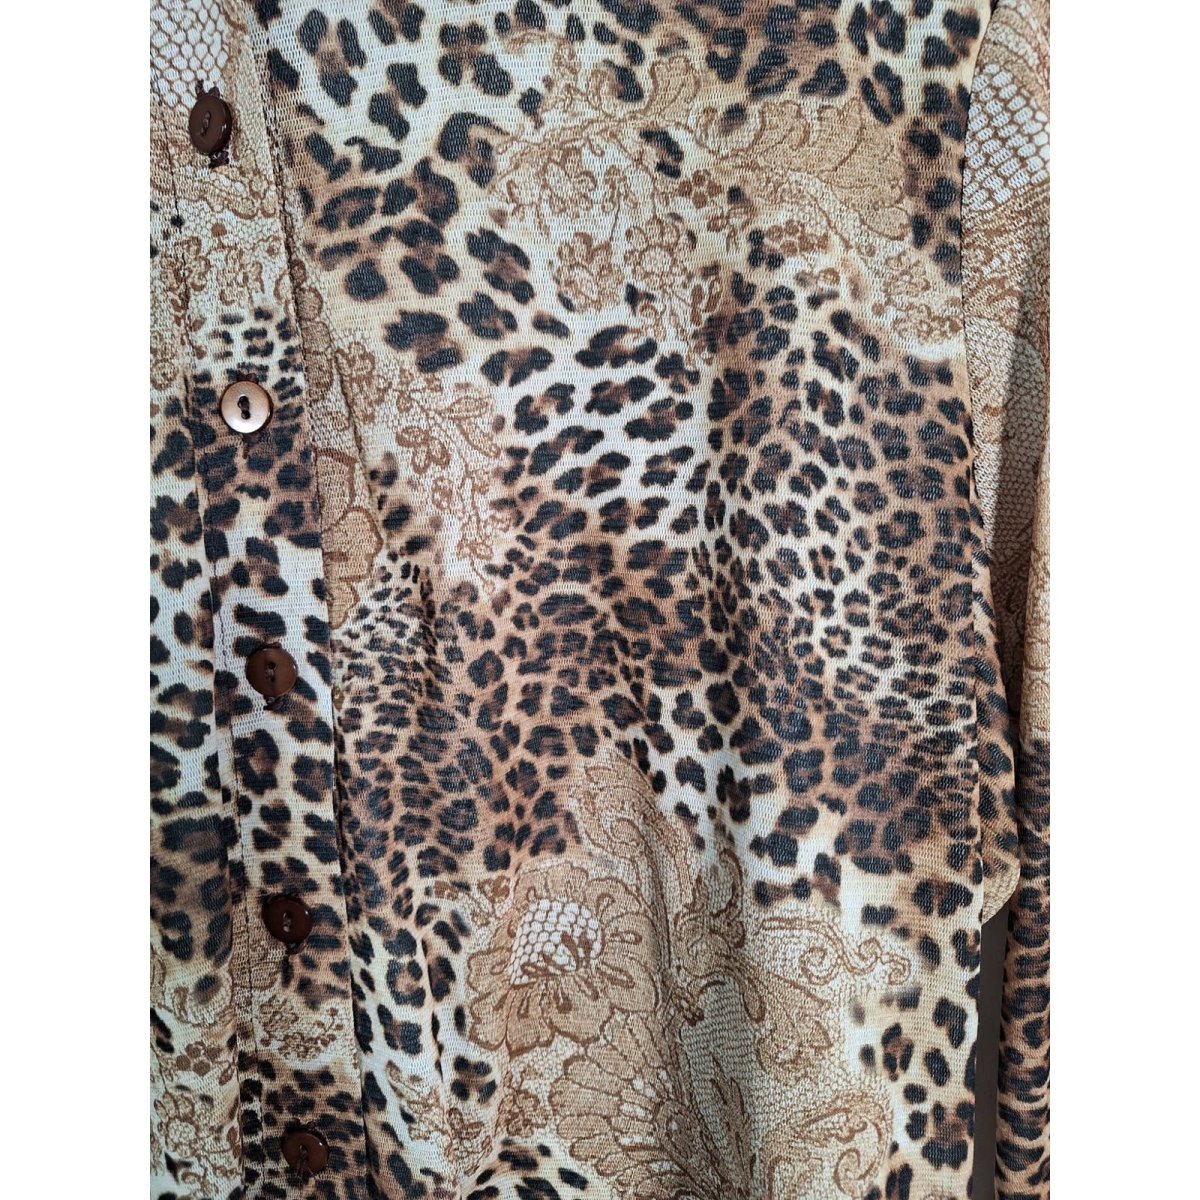 Vintage 90s Paisley Leopard Mesh Shirt Size XL - themallvintage The Mall Vintage